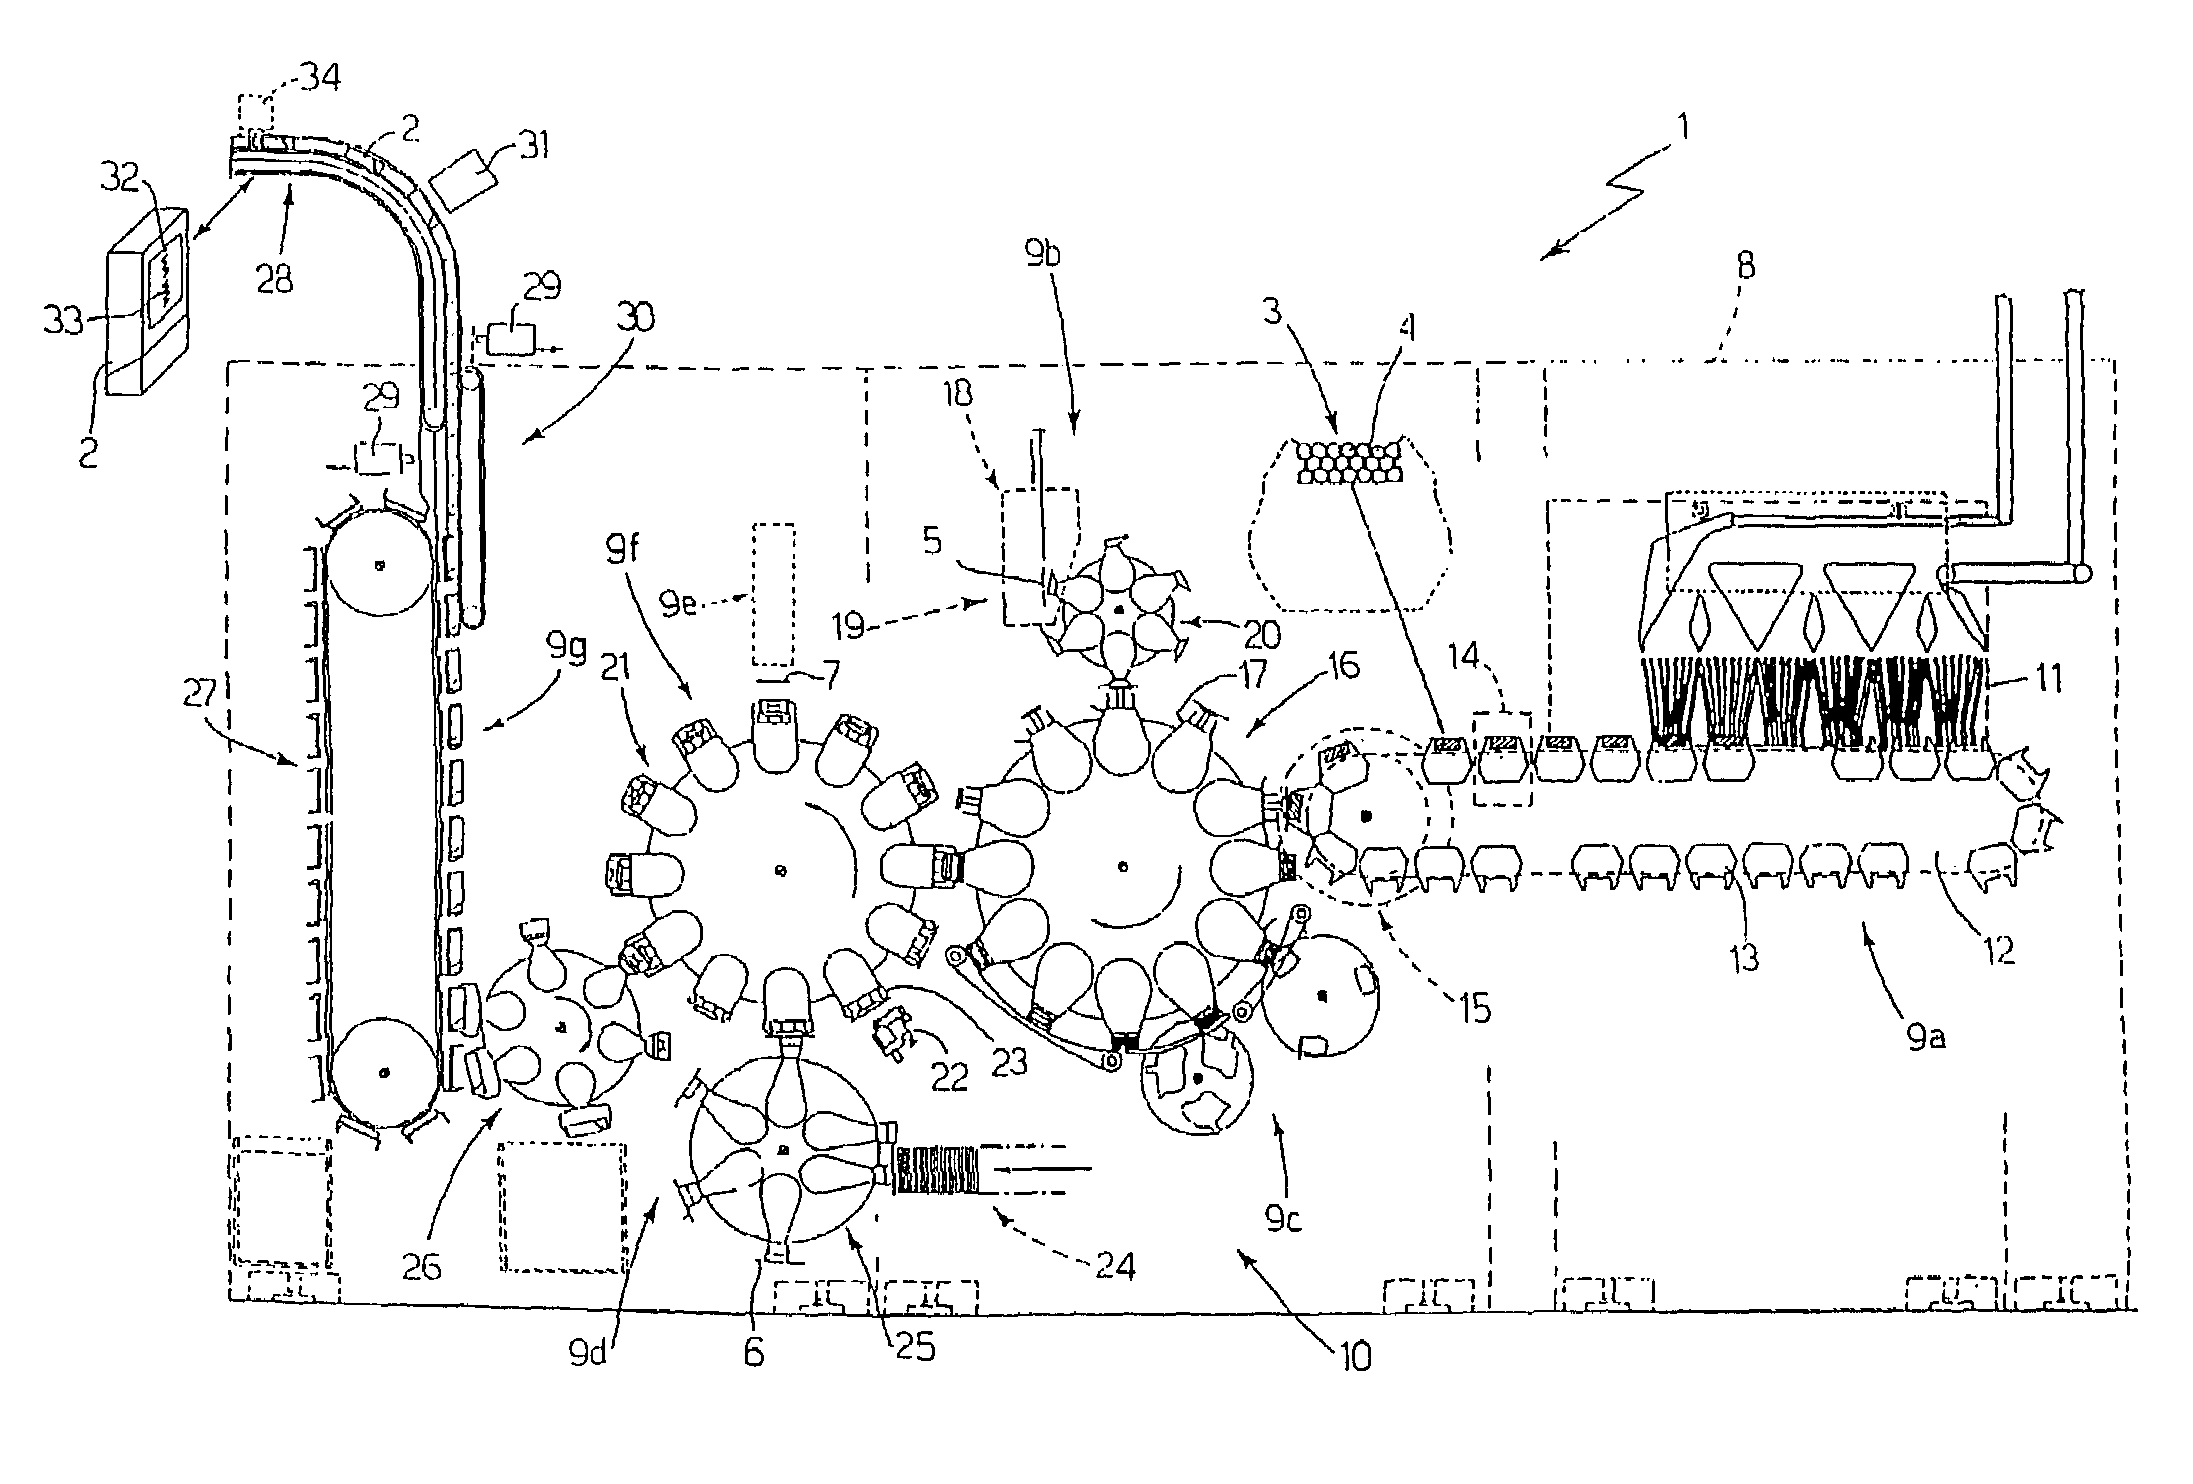 Method of making a brand change on an automatic production system for processing tobacco articles